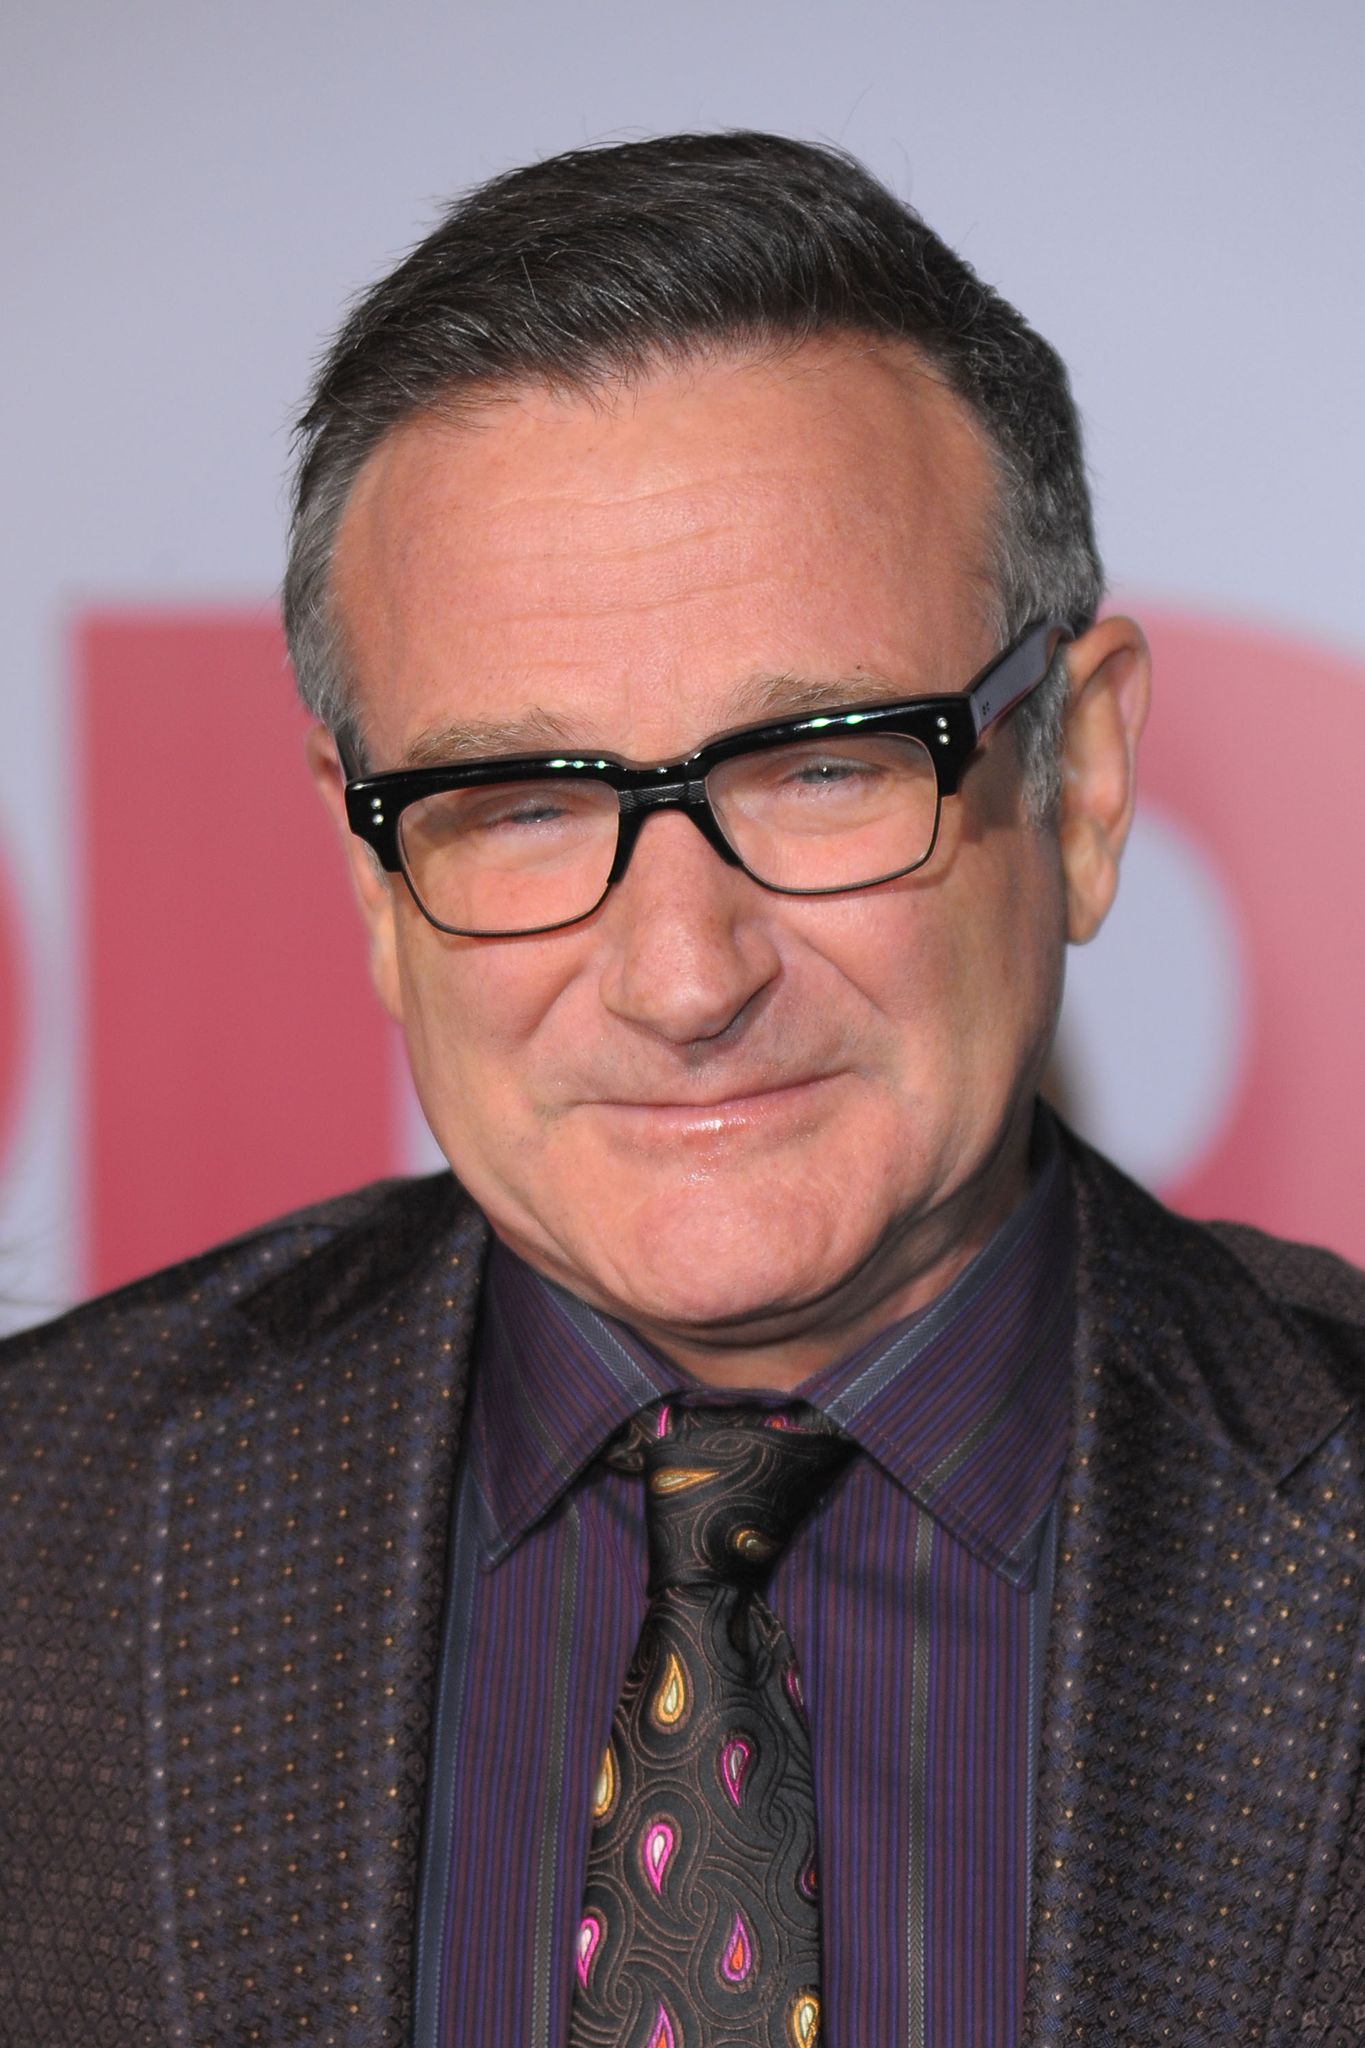 Robin Williams at the premiere of Walt Disney Pictures' 'Old Dogs' at the El Capitan Theatre on November 9, 2009 in Hollywood, California. | Photo: Getty Images